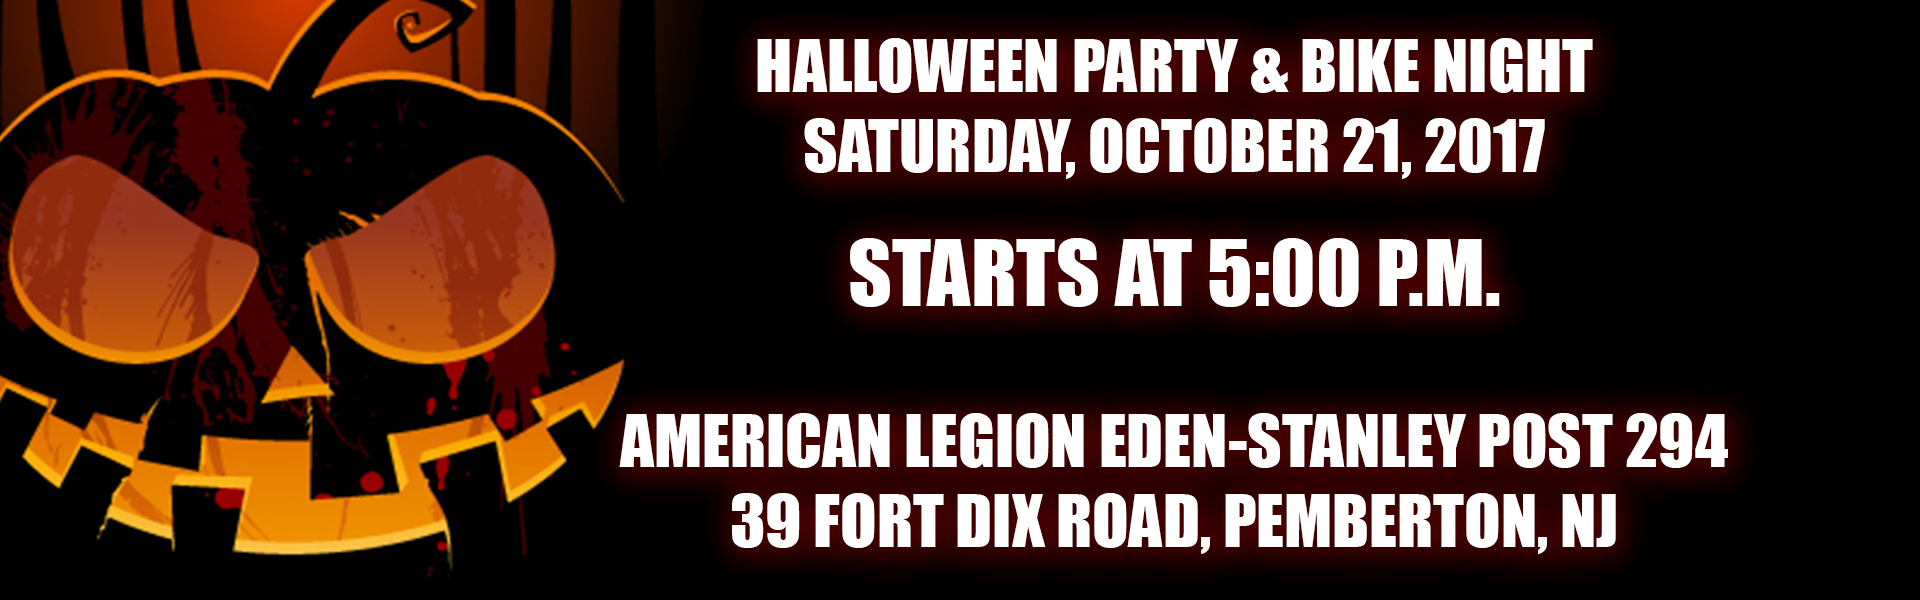 Nam Knights of America Motorcycle Club, Tri-Base Chapter Halloween Party & Bike Night